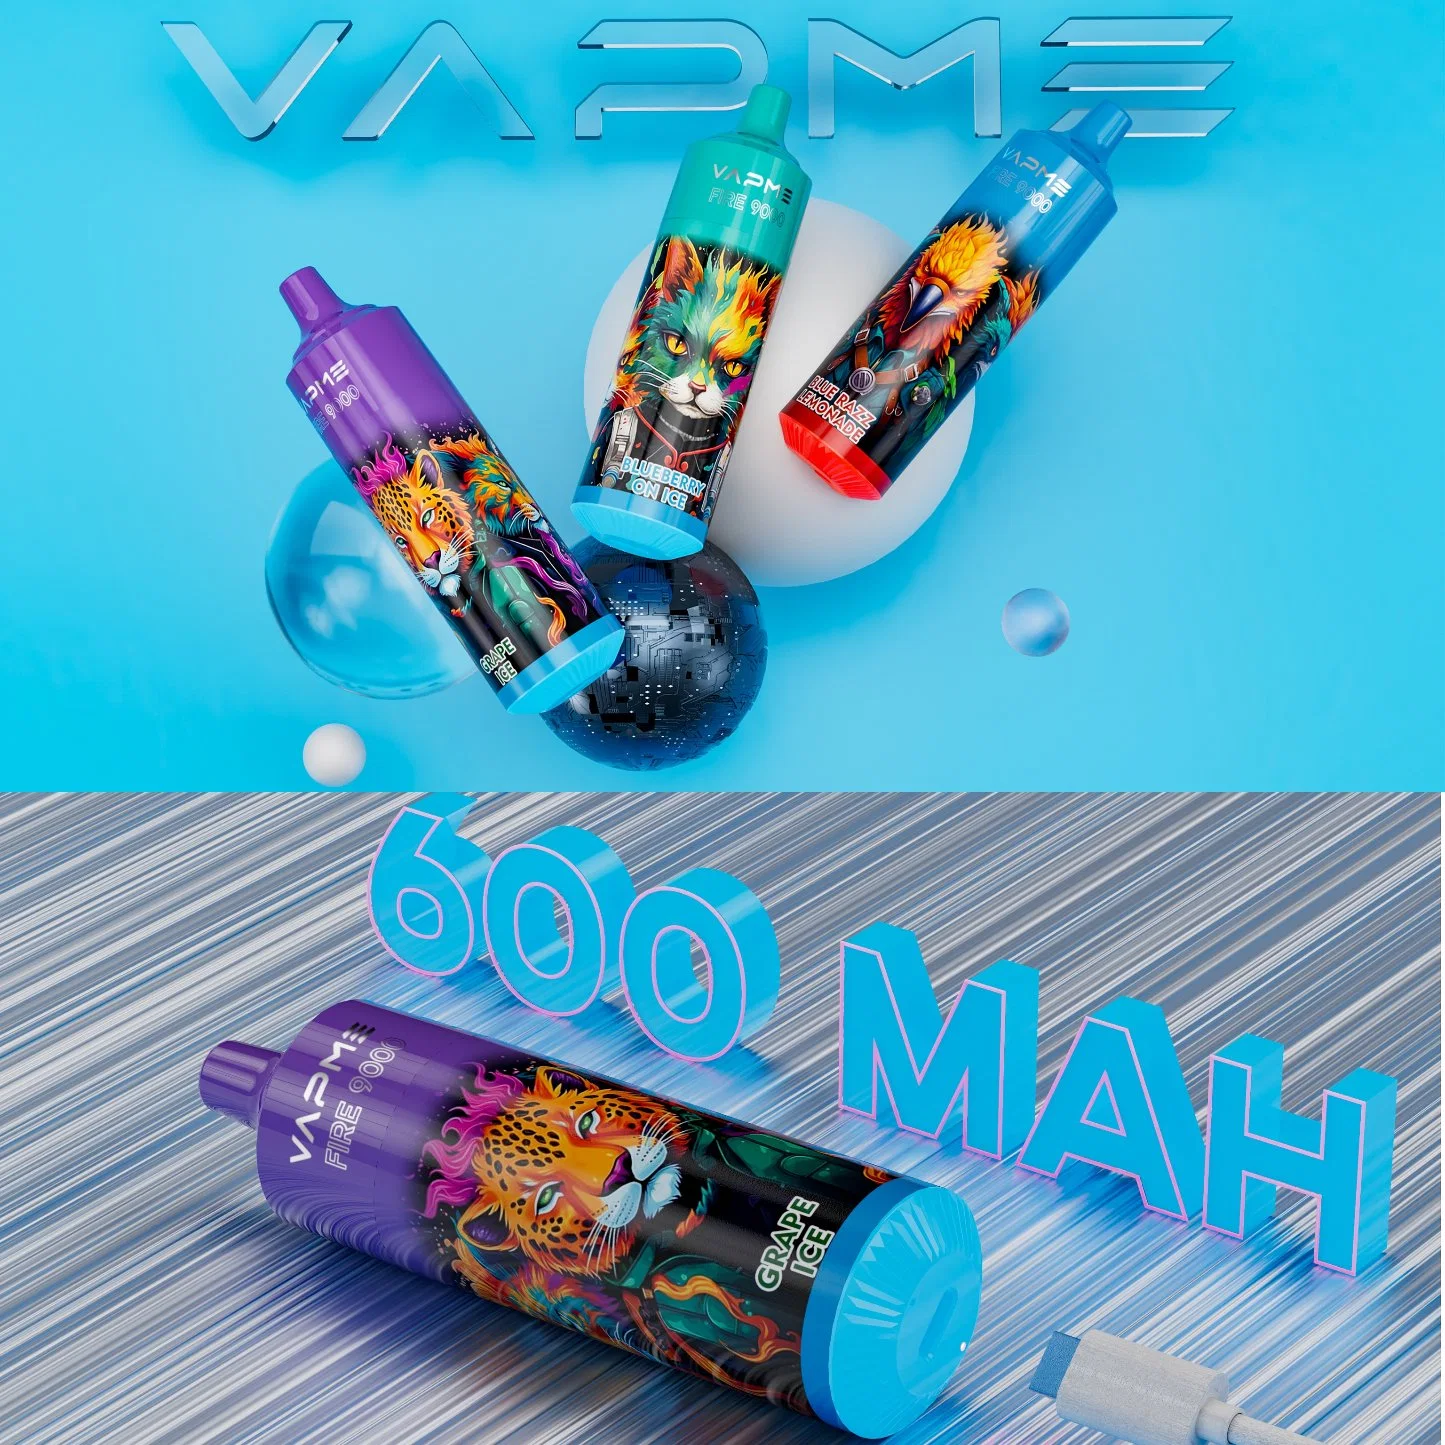 Vapme Fire 9000 Puffs Disposable/Chargeable Vape Pod 18ml Pre-Filled 850mAh Rechargeable Battery